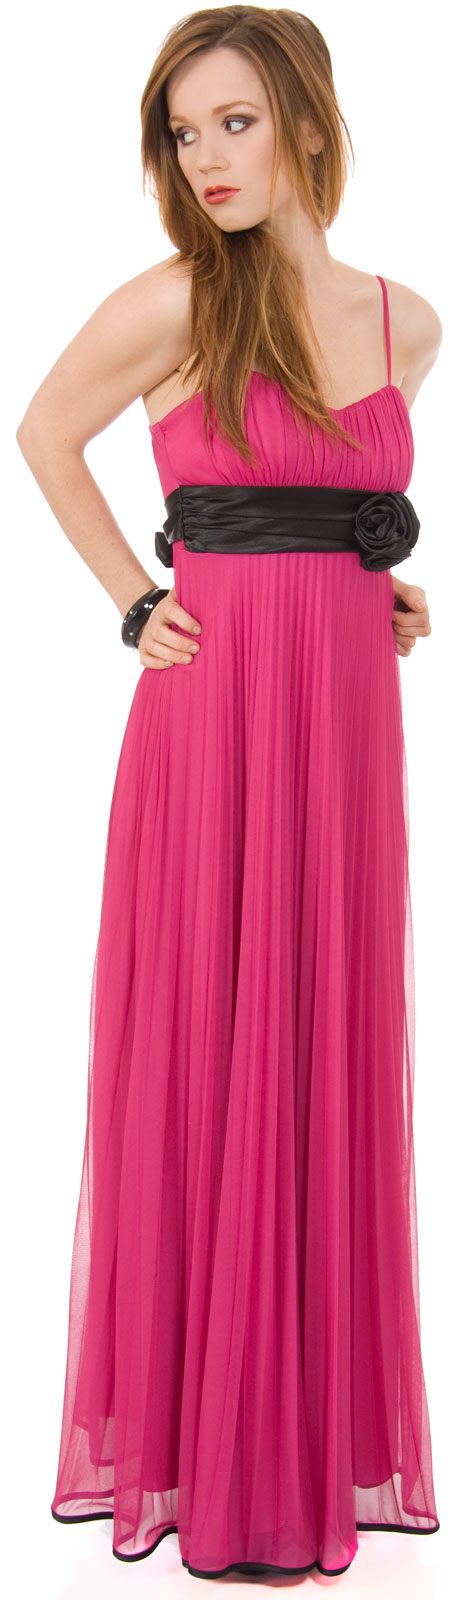 Image of Roman Inspired Long Formal Dress With Floral Applique in Magenta